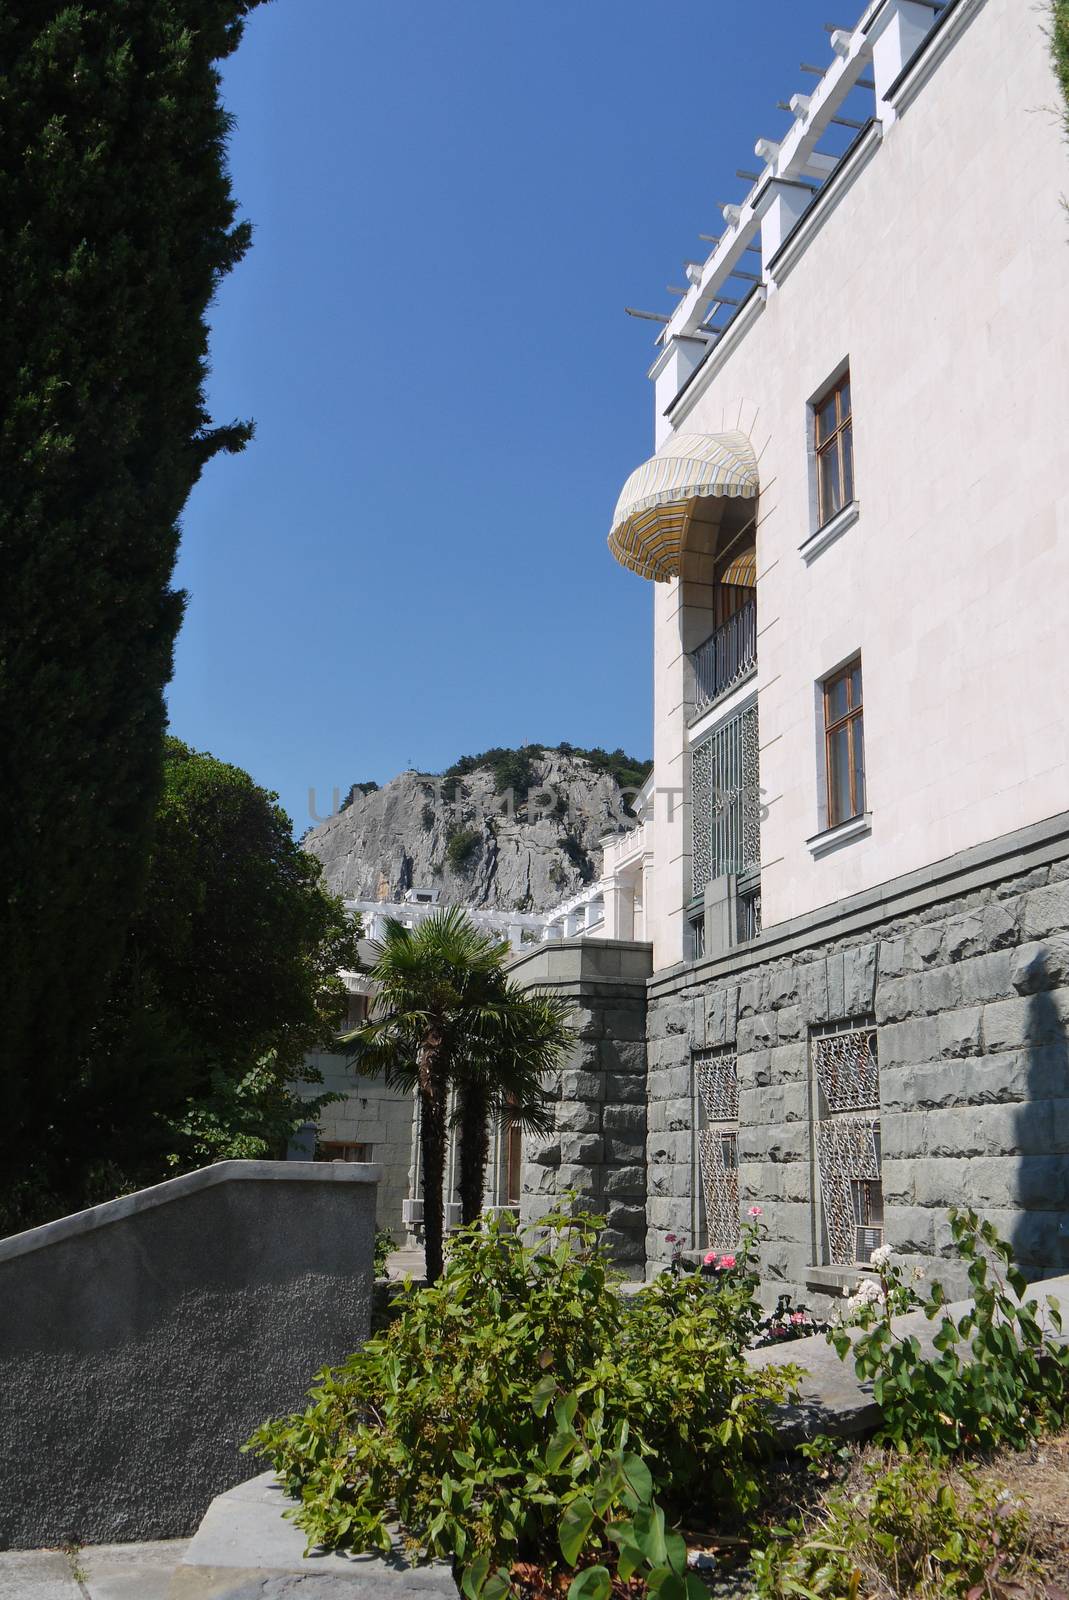 The building of the sanatorium complex with a beautiful balcony and palm trees under it against the background of a high rocky cliff